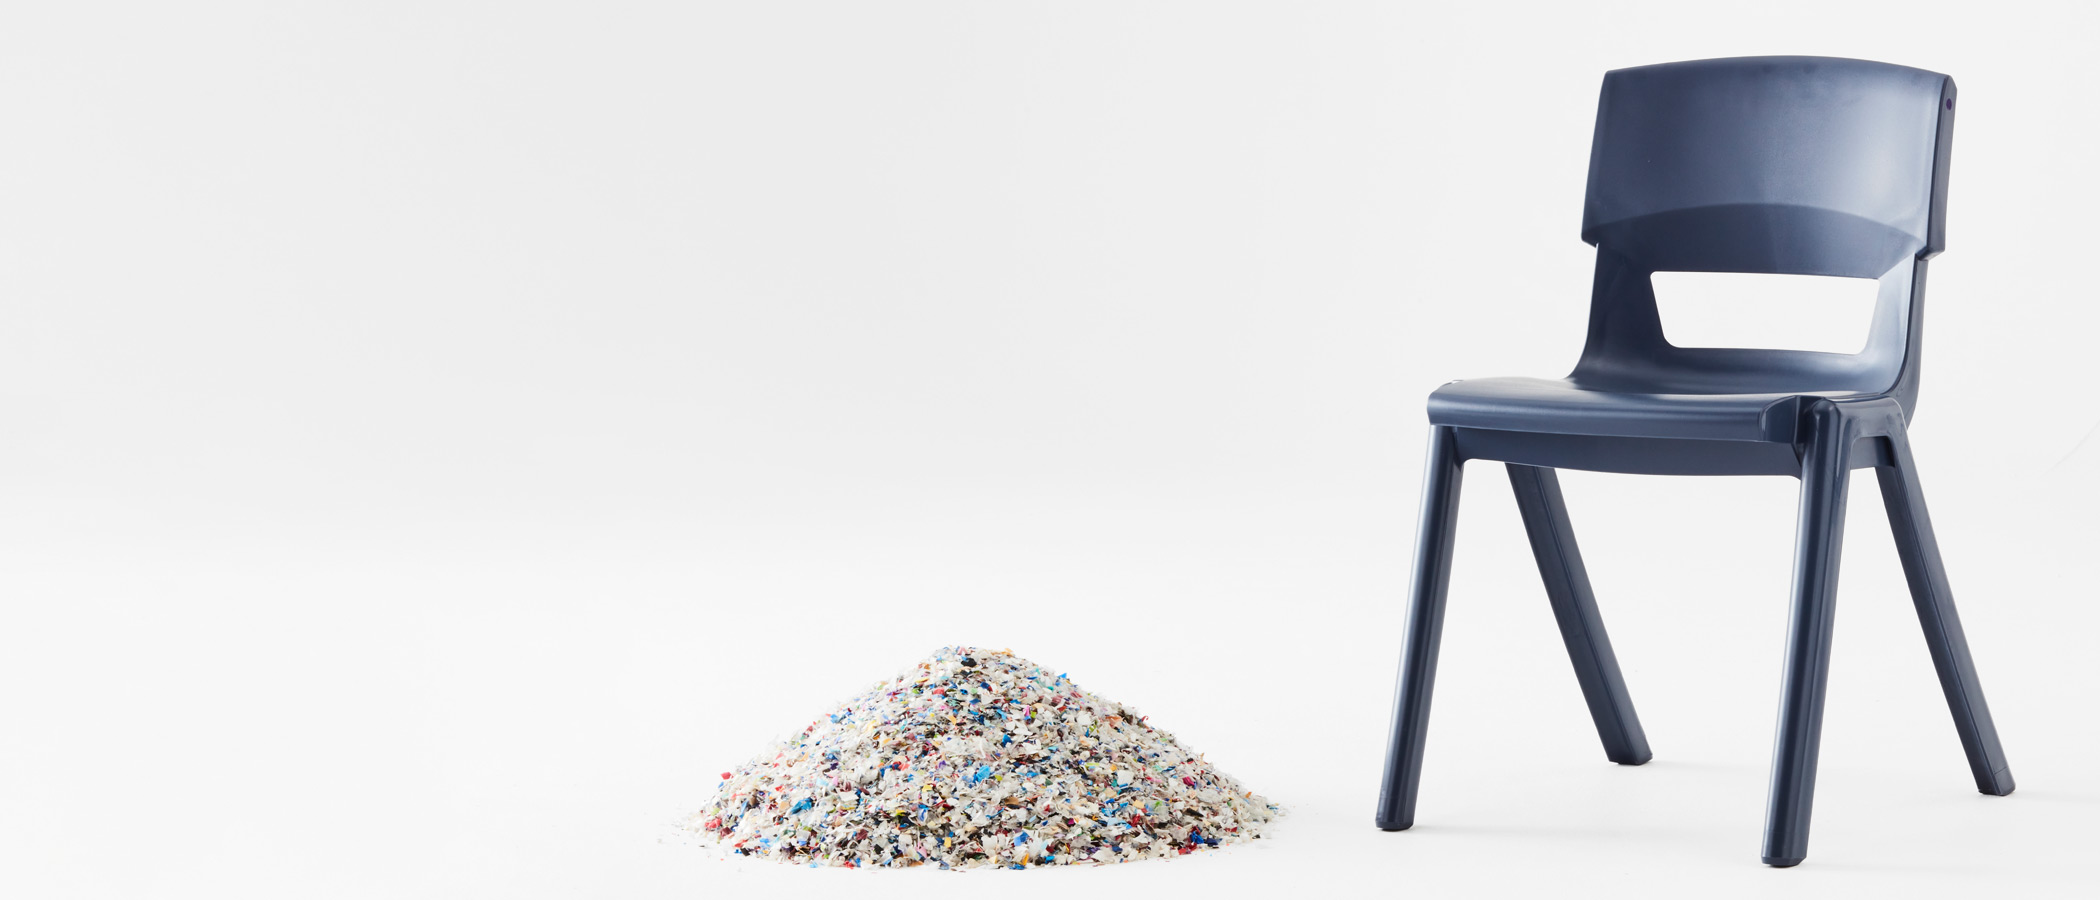 Recycled Postura Max® Chair